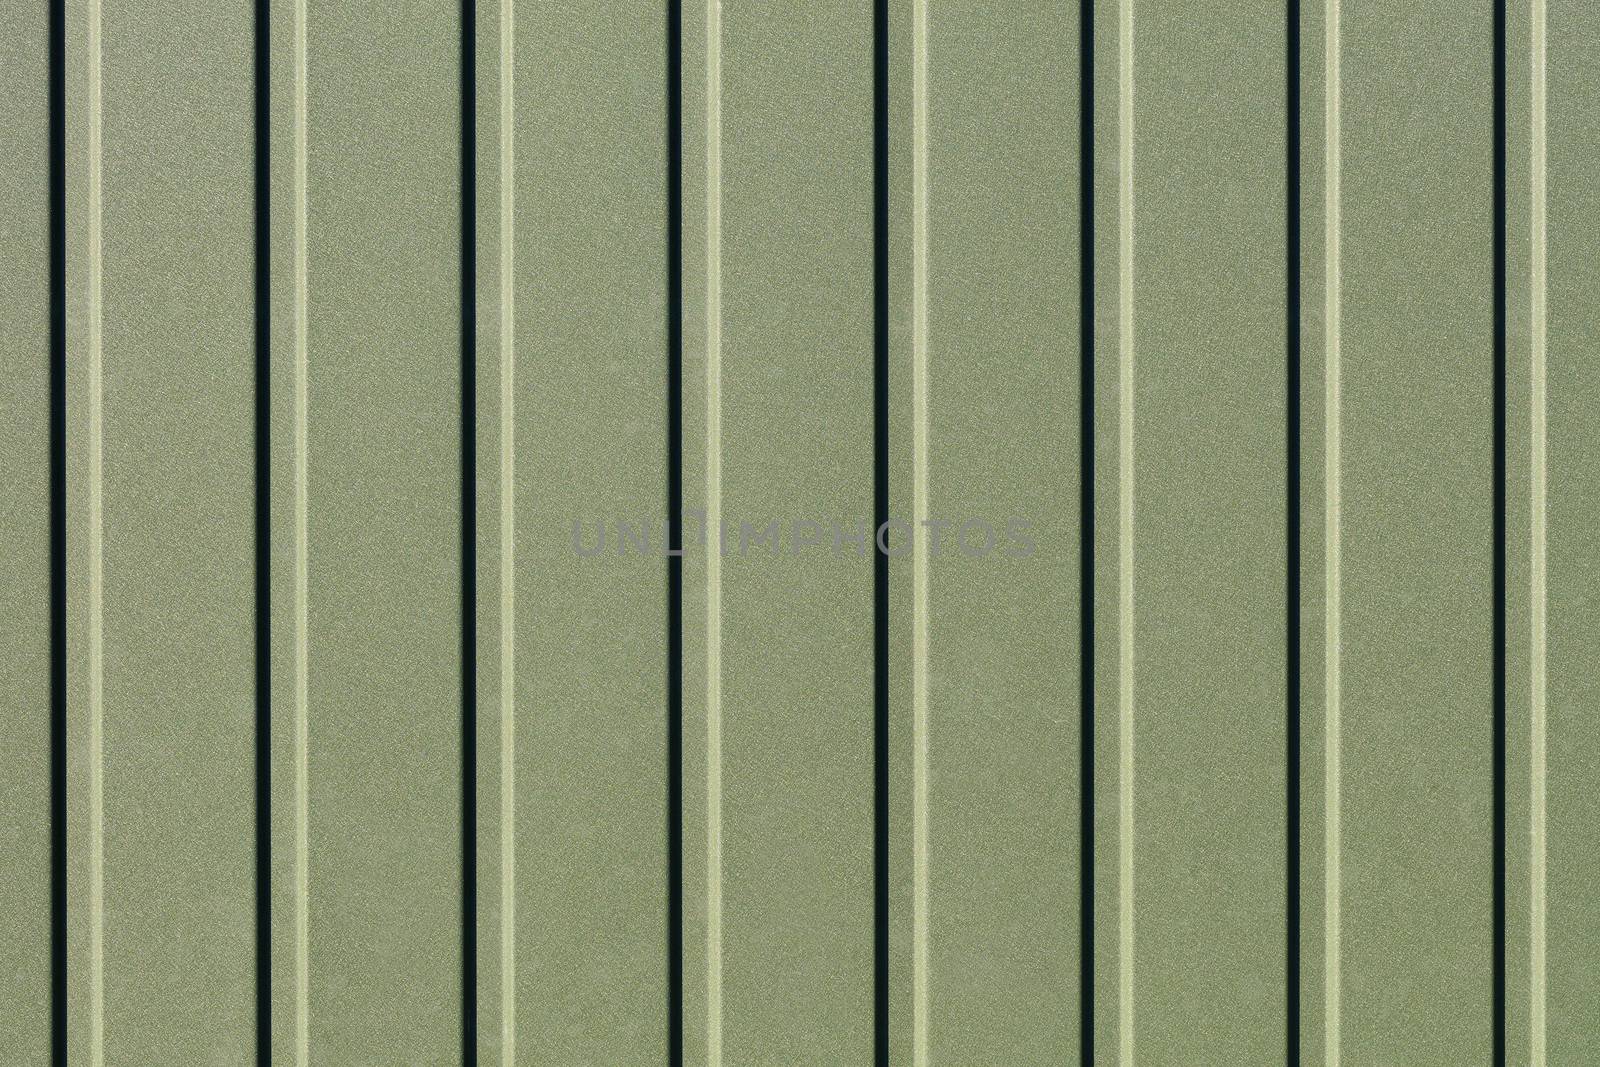 Green corrugated steel sheet with vertical guides. by Sergii